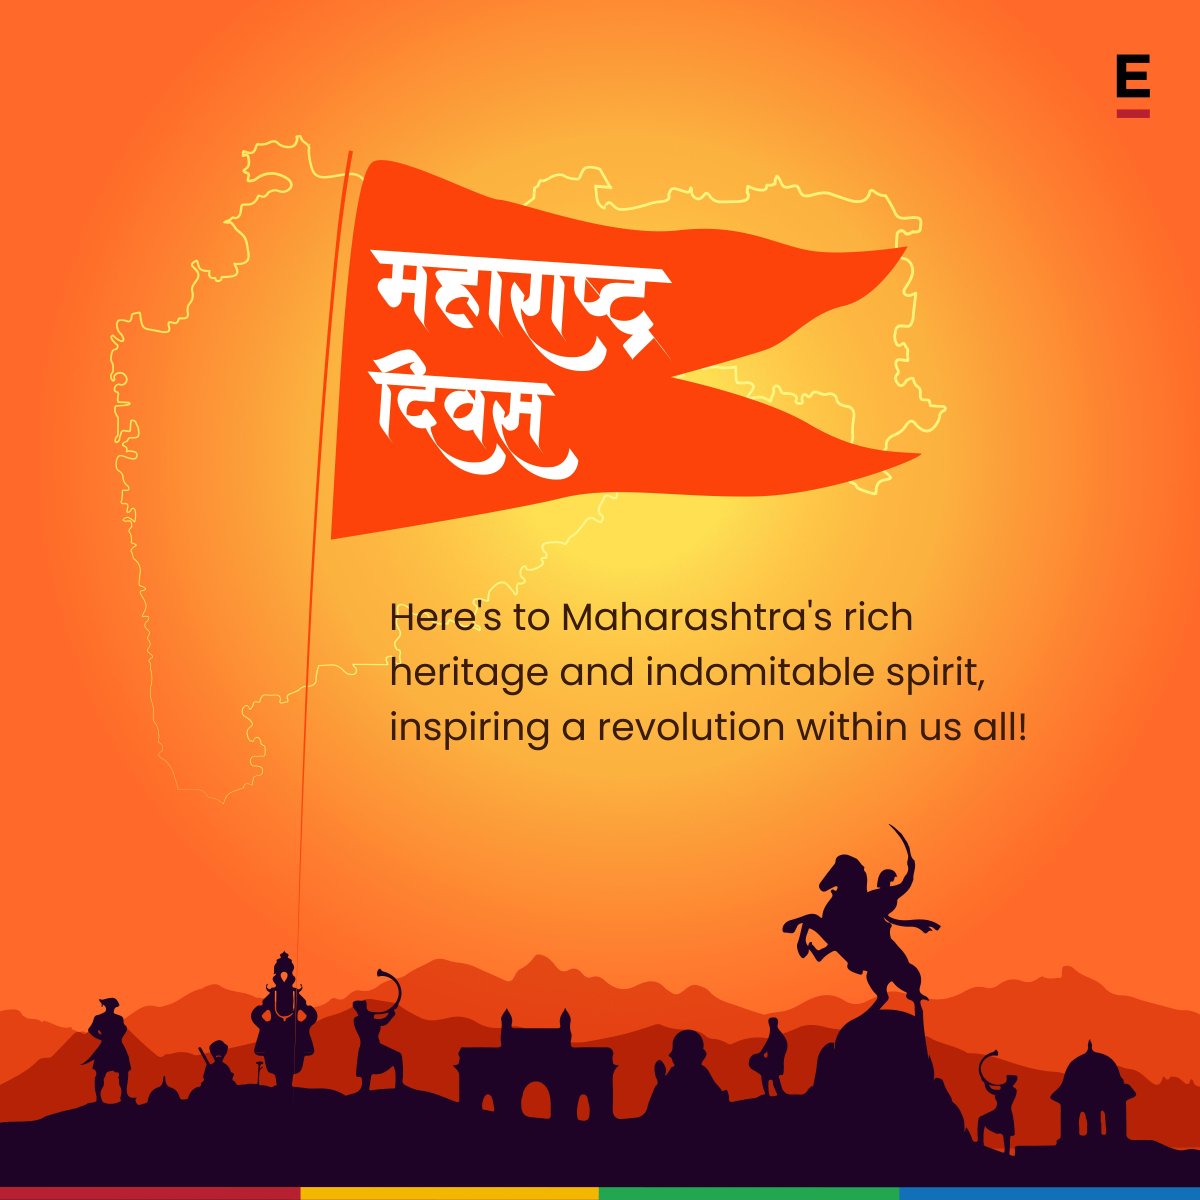 🚩 Here's to the unbreakable spirit of Maharashtra Day! Let's keep pushing forward with determination, overcoming challenges, and celebrating our victories along the way. 🚩 

#MaharashtraDay #Maharashtra #MaharashtraDivas #Extentia #DoMoreBeMore